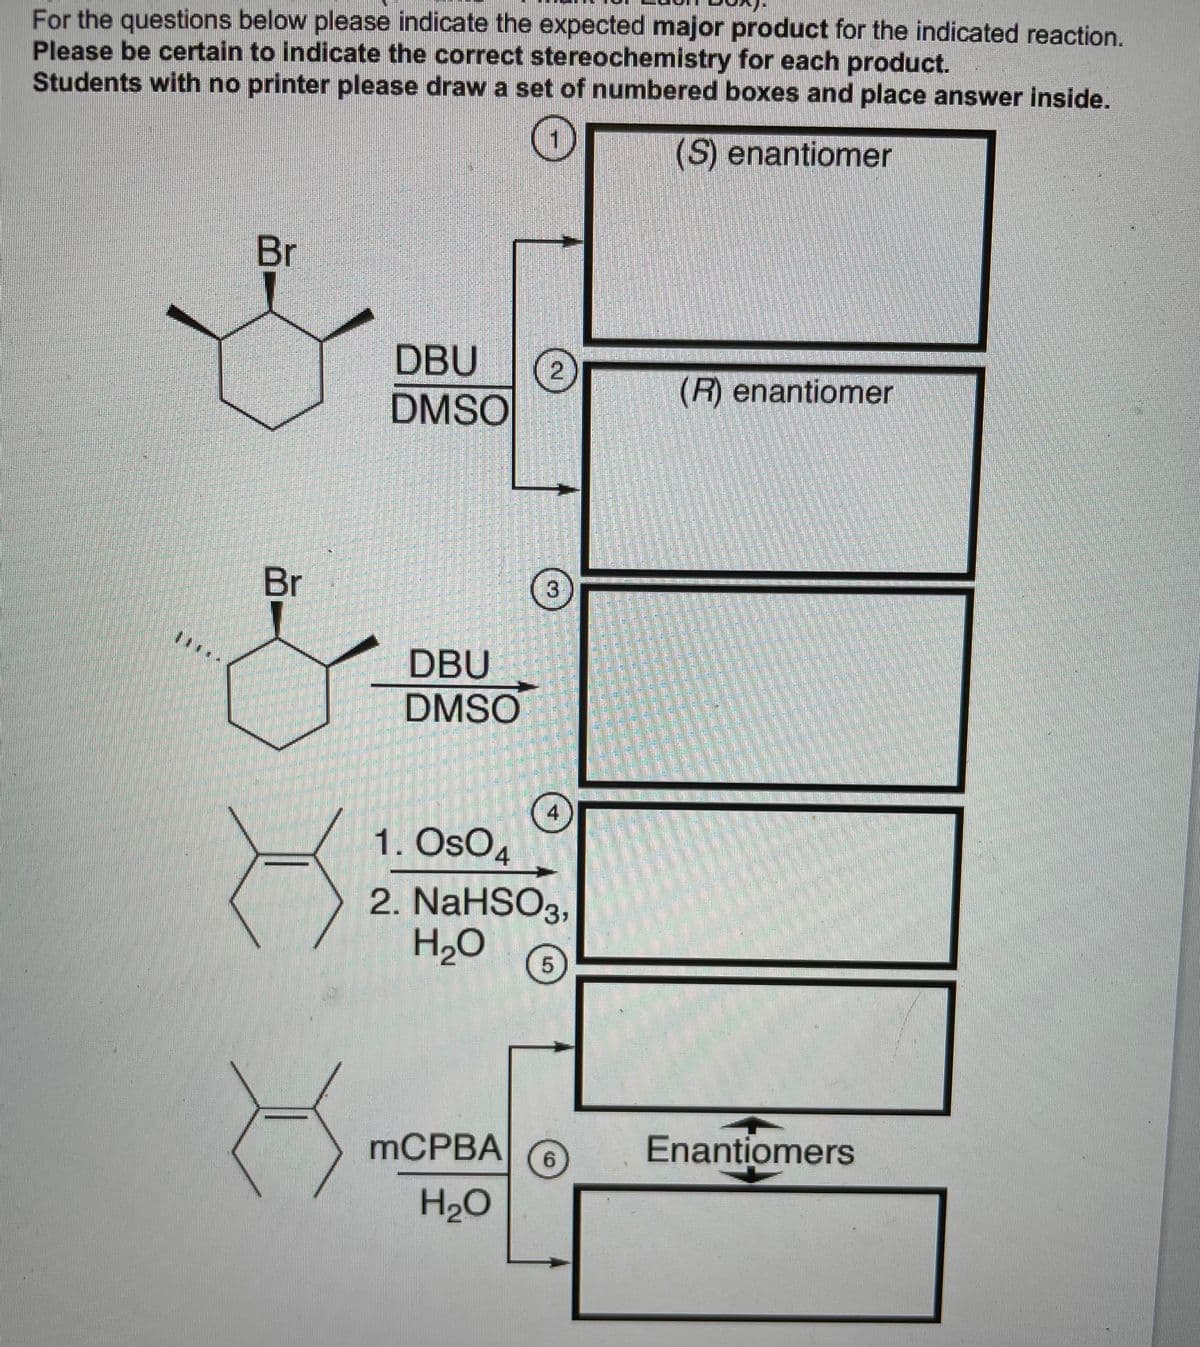 For the questions below please indicate the expected major product for the indicated reaction.
Please be certain to indicate the correct stereochemistry for each product.
Students with no printer please draw a set of numbered boxes and place answer inside.
(S) enantiomer
Br
DBU
DMSO
(R) enantiomer
Br
DBU
DMSO
4
1. OsO4
2. NaHSO3,
H2O
5
MCPBA
Enantiomers
6.
H20
